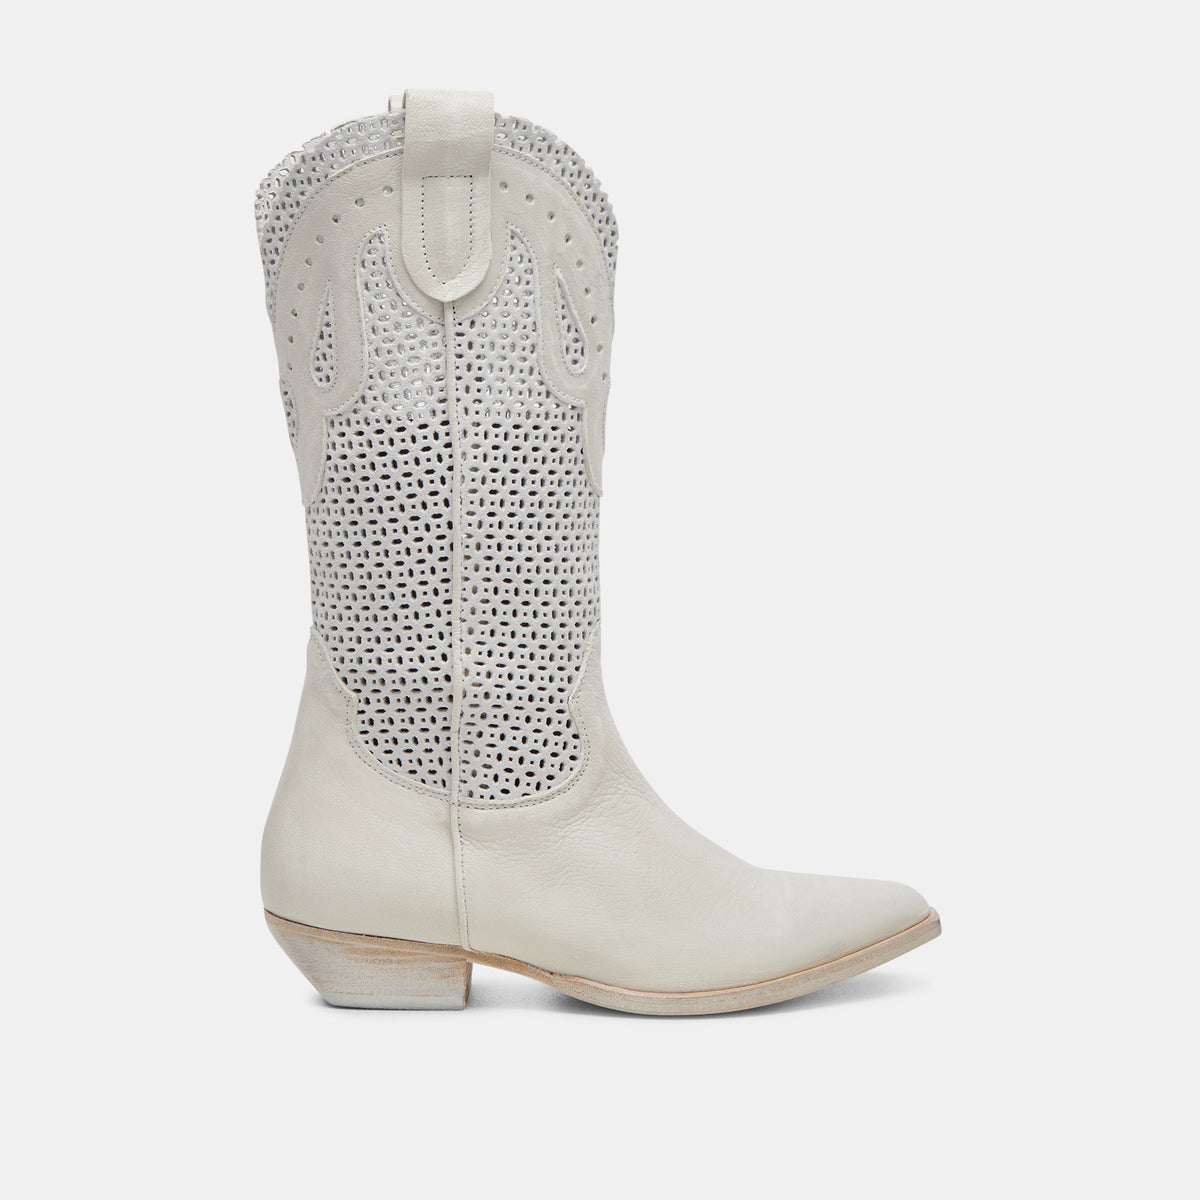 RANCH BOOTS IVORY LEATHER – Dolce Vita